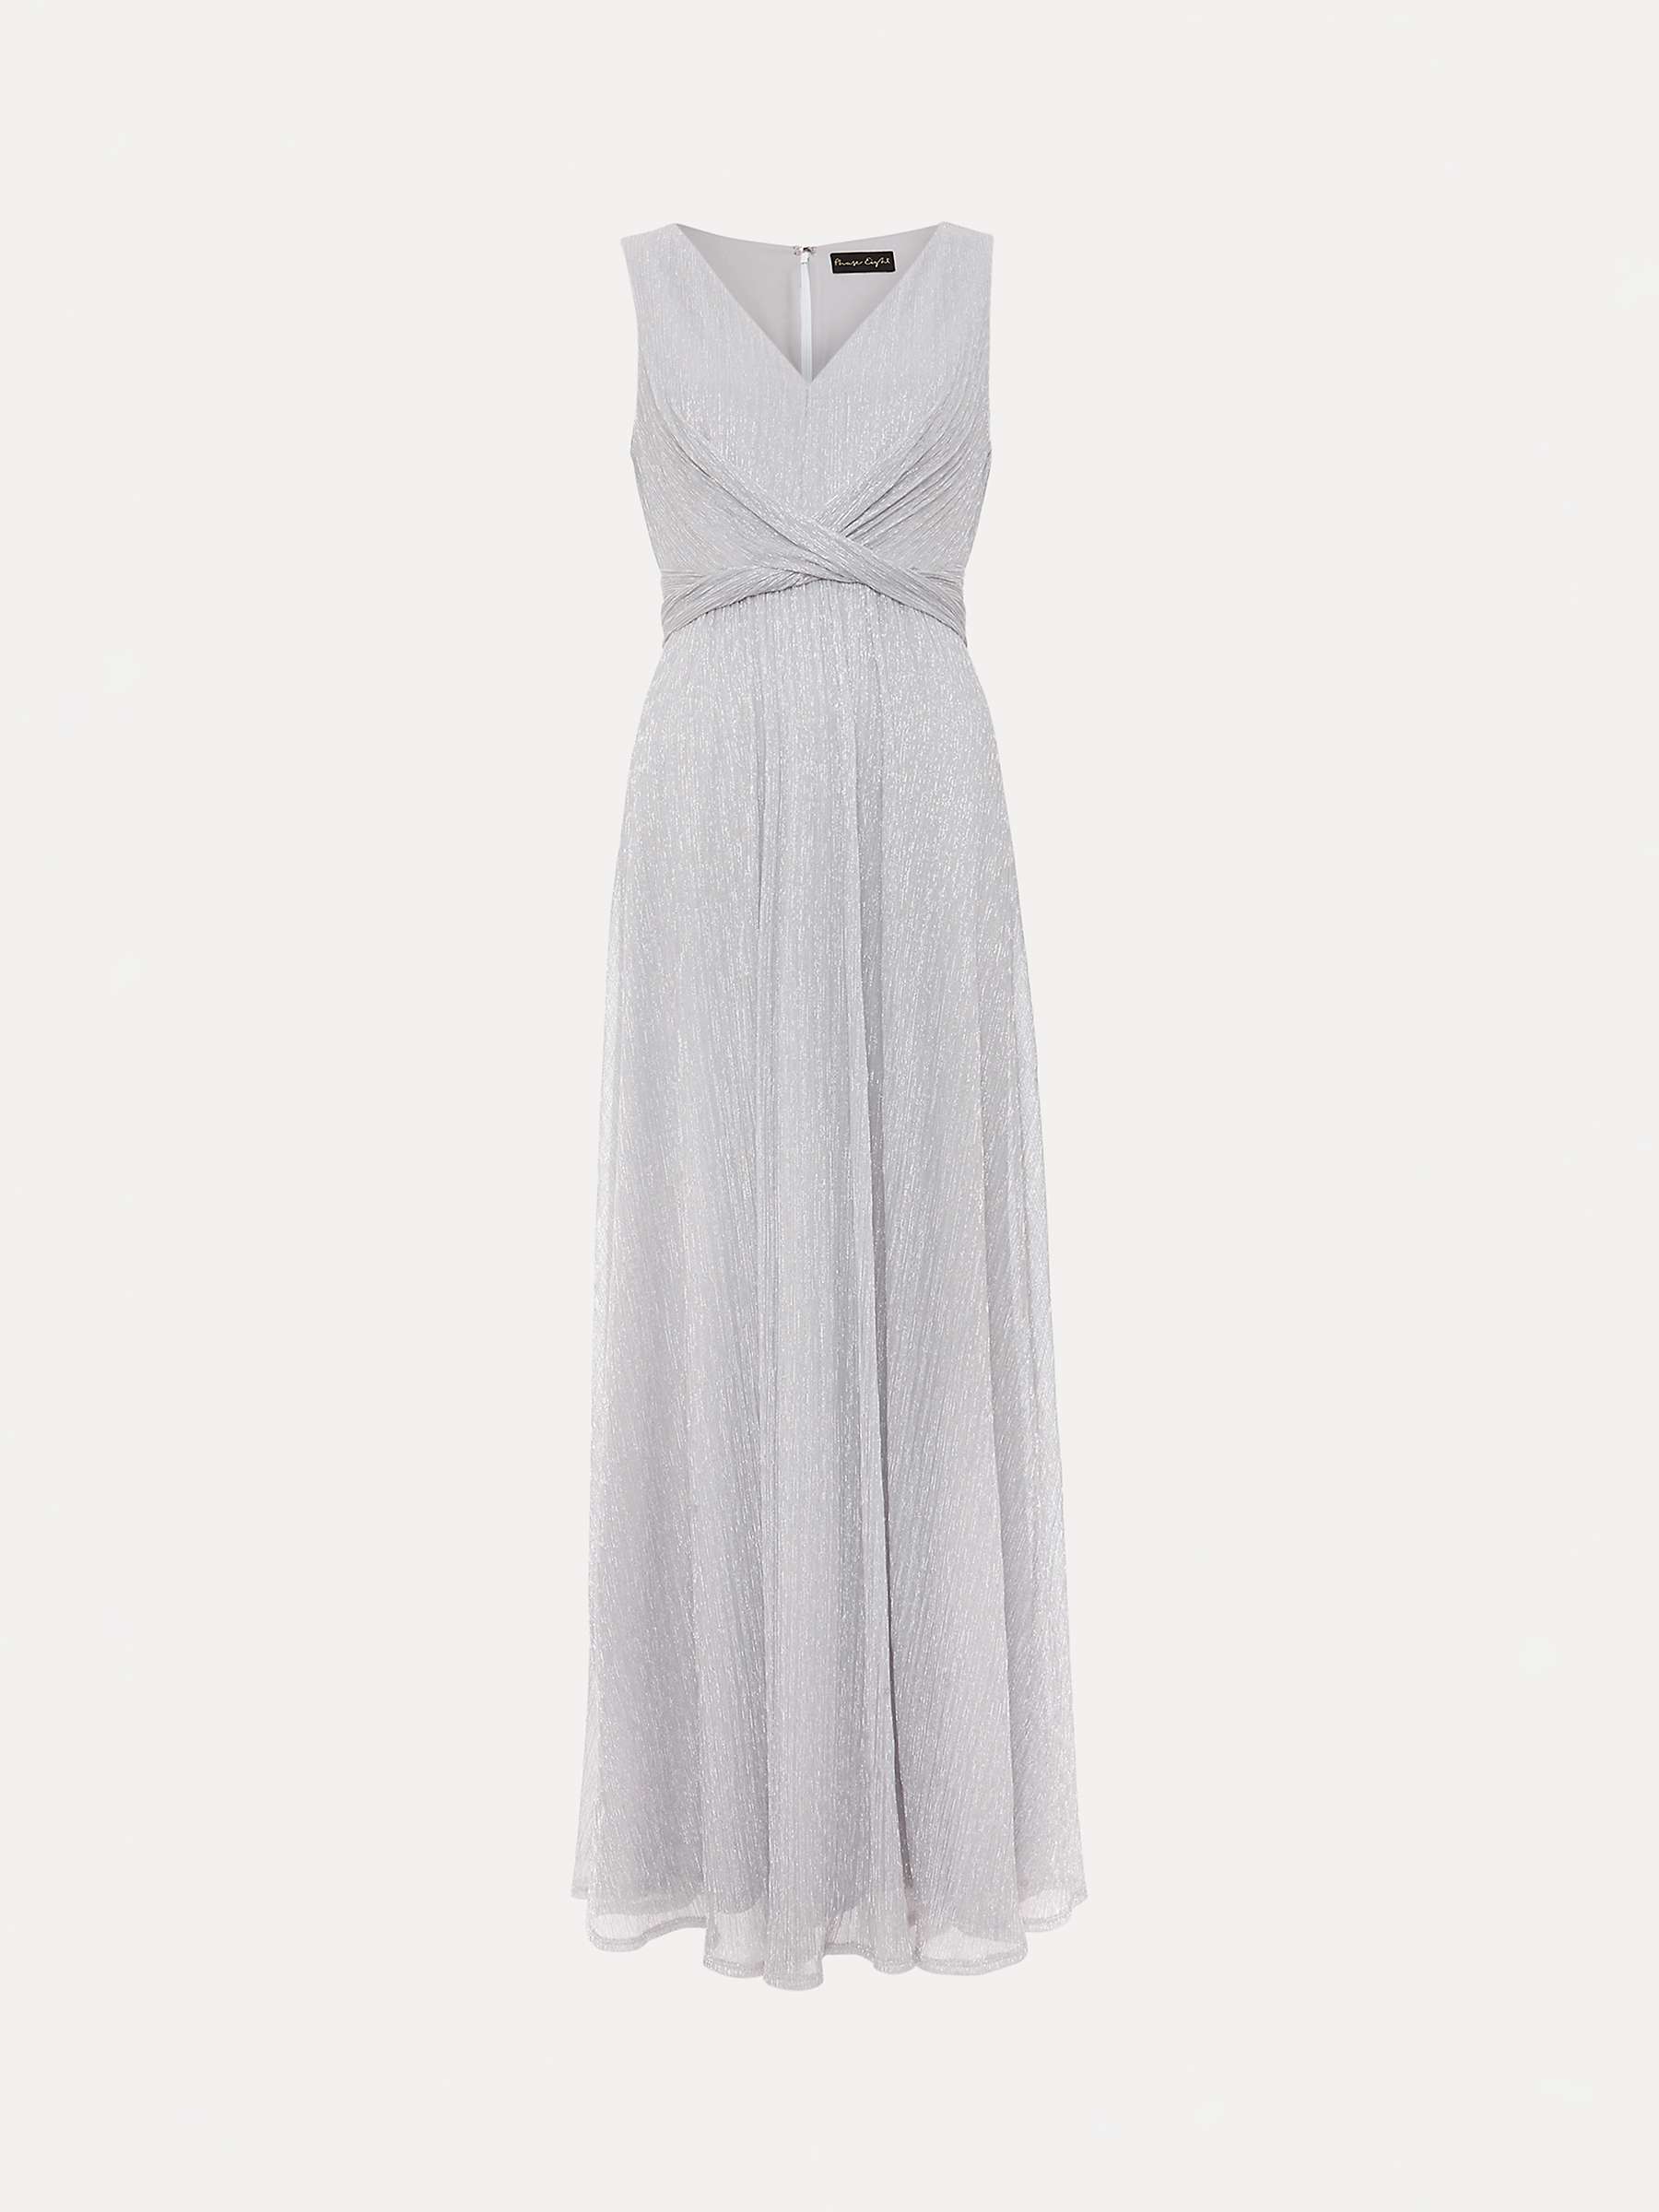 Buy Phase Eight Collection 8 Artemis Shimmer Maxi Dress, Silver Online at johnlewis.com